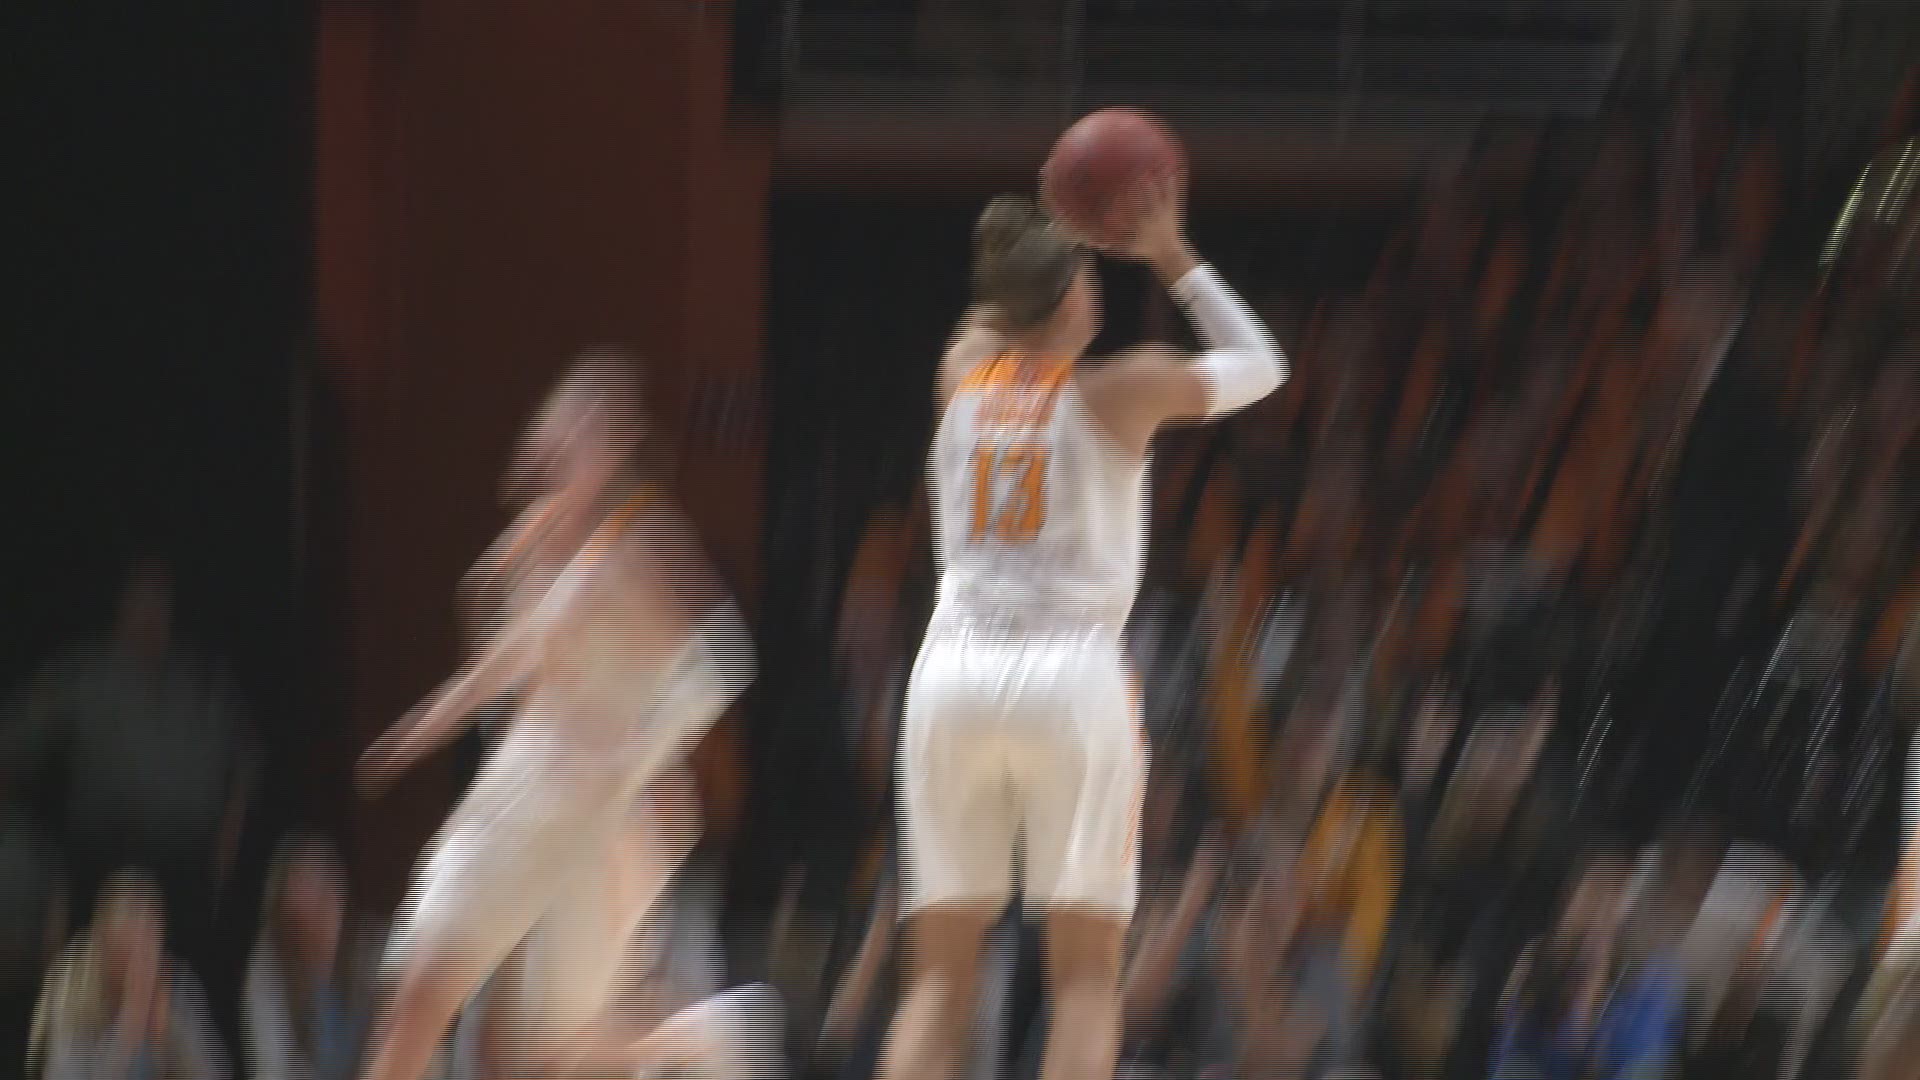 Lady Vols junior forward Kortney Dunbar shone late in Sunday's 85-55 win over Navy, recording a steal and banking a three-pointer shortly thereafter.